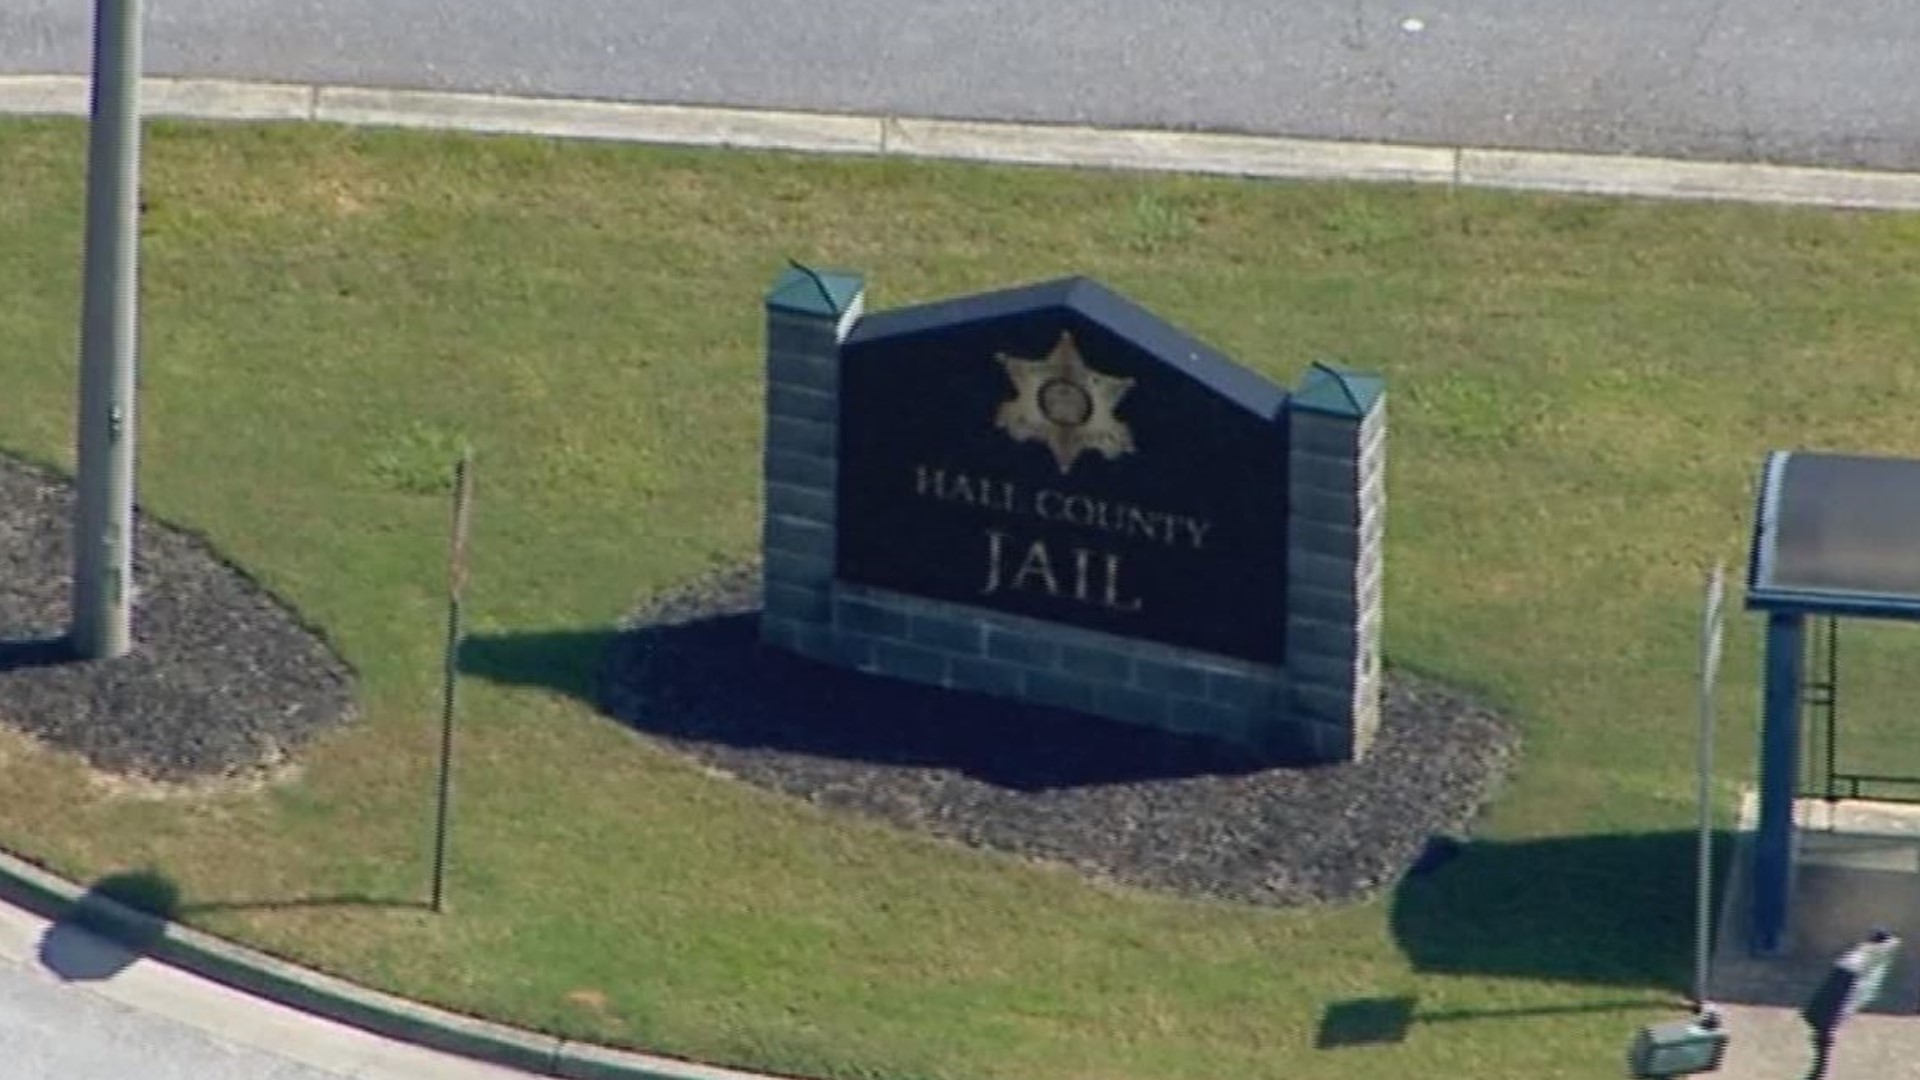 11Alive captured aerials of the Hall County Jail in Georgia.